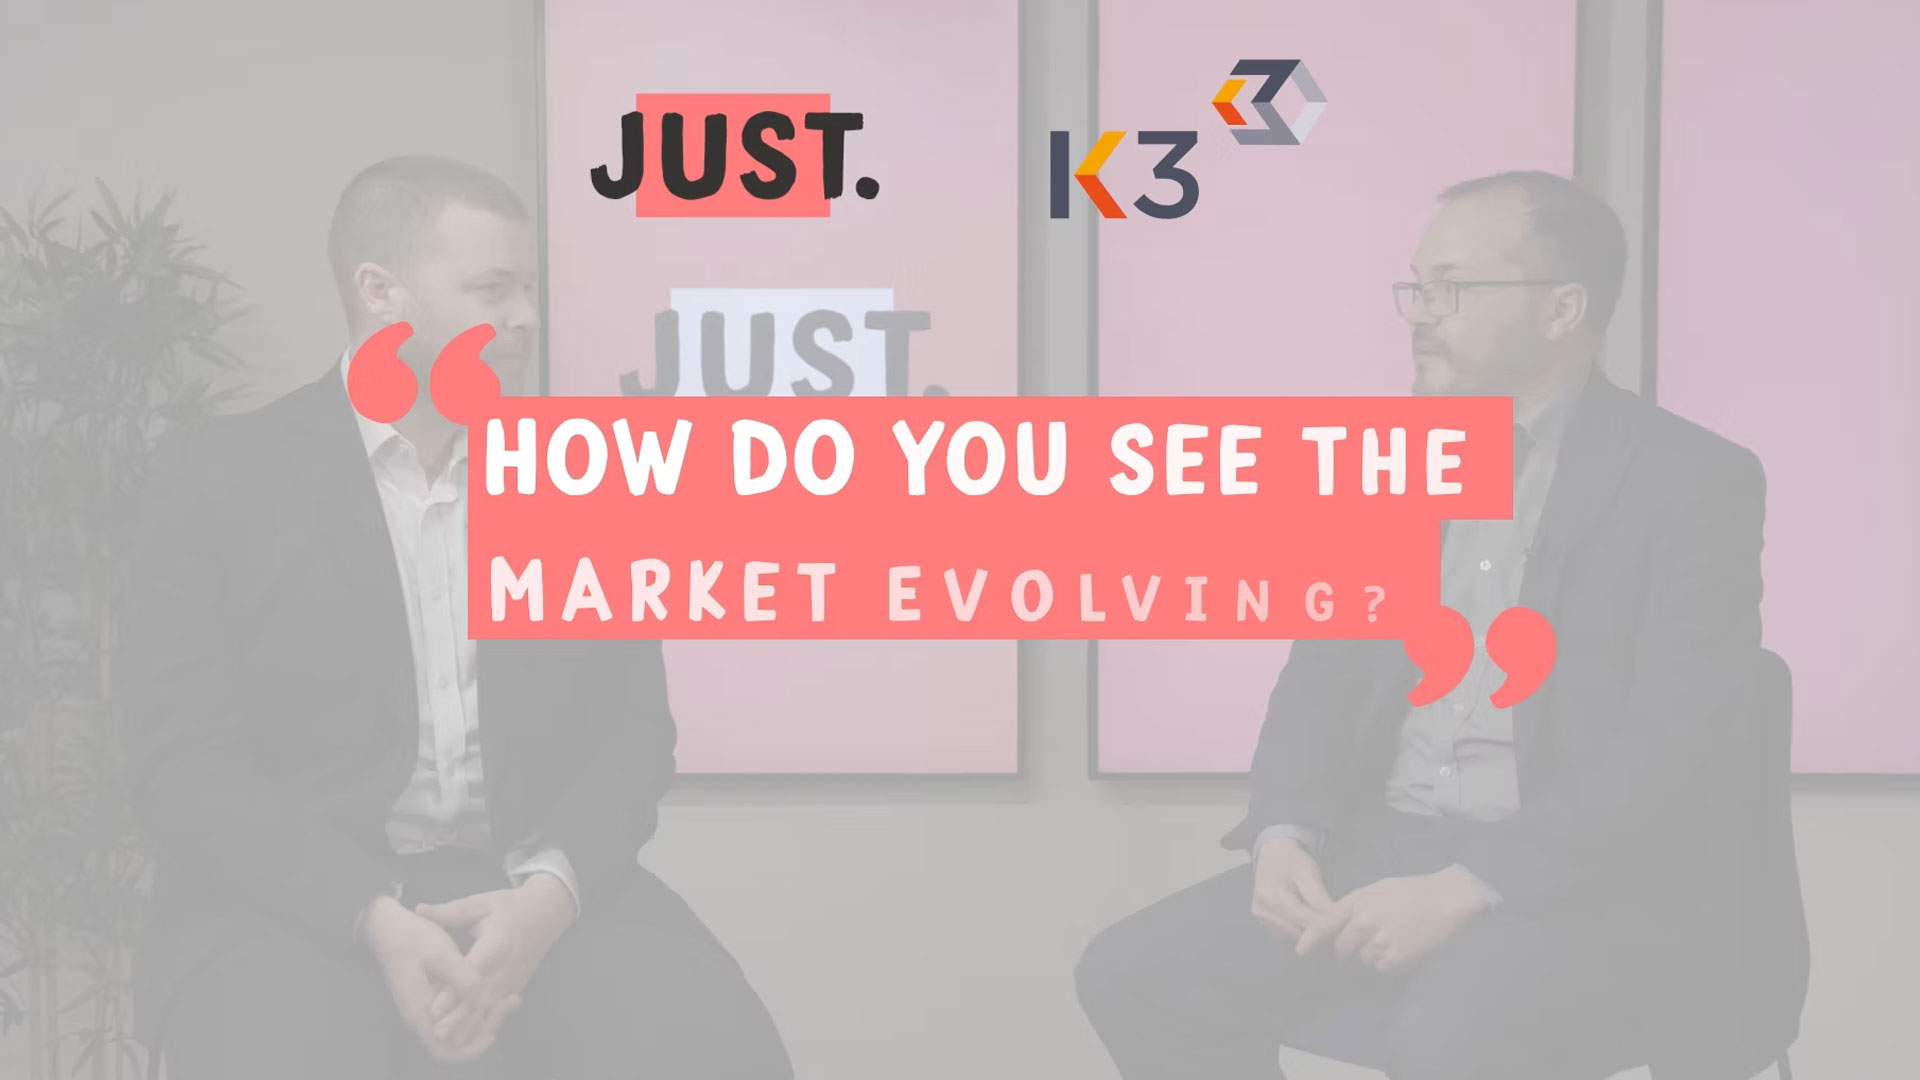 How do you see the market evolving?